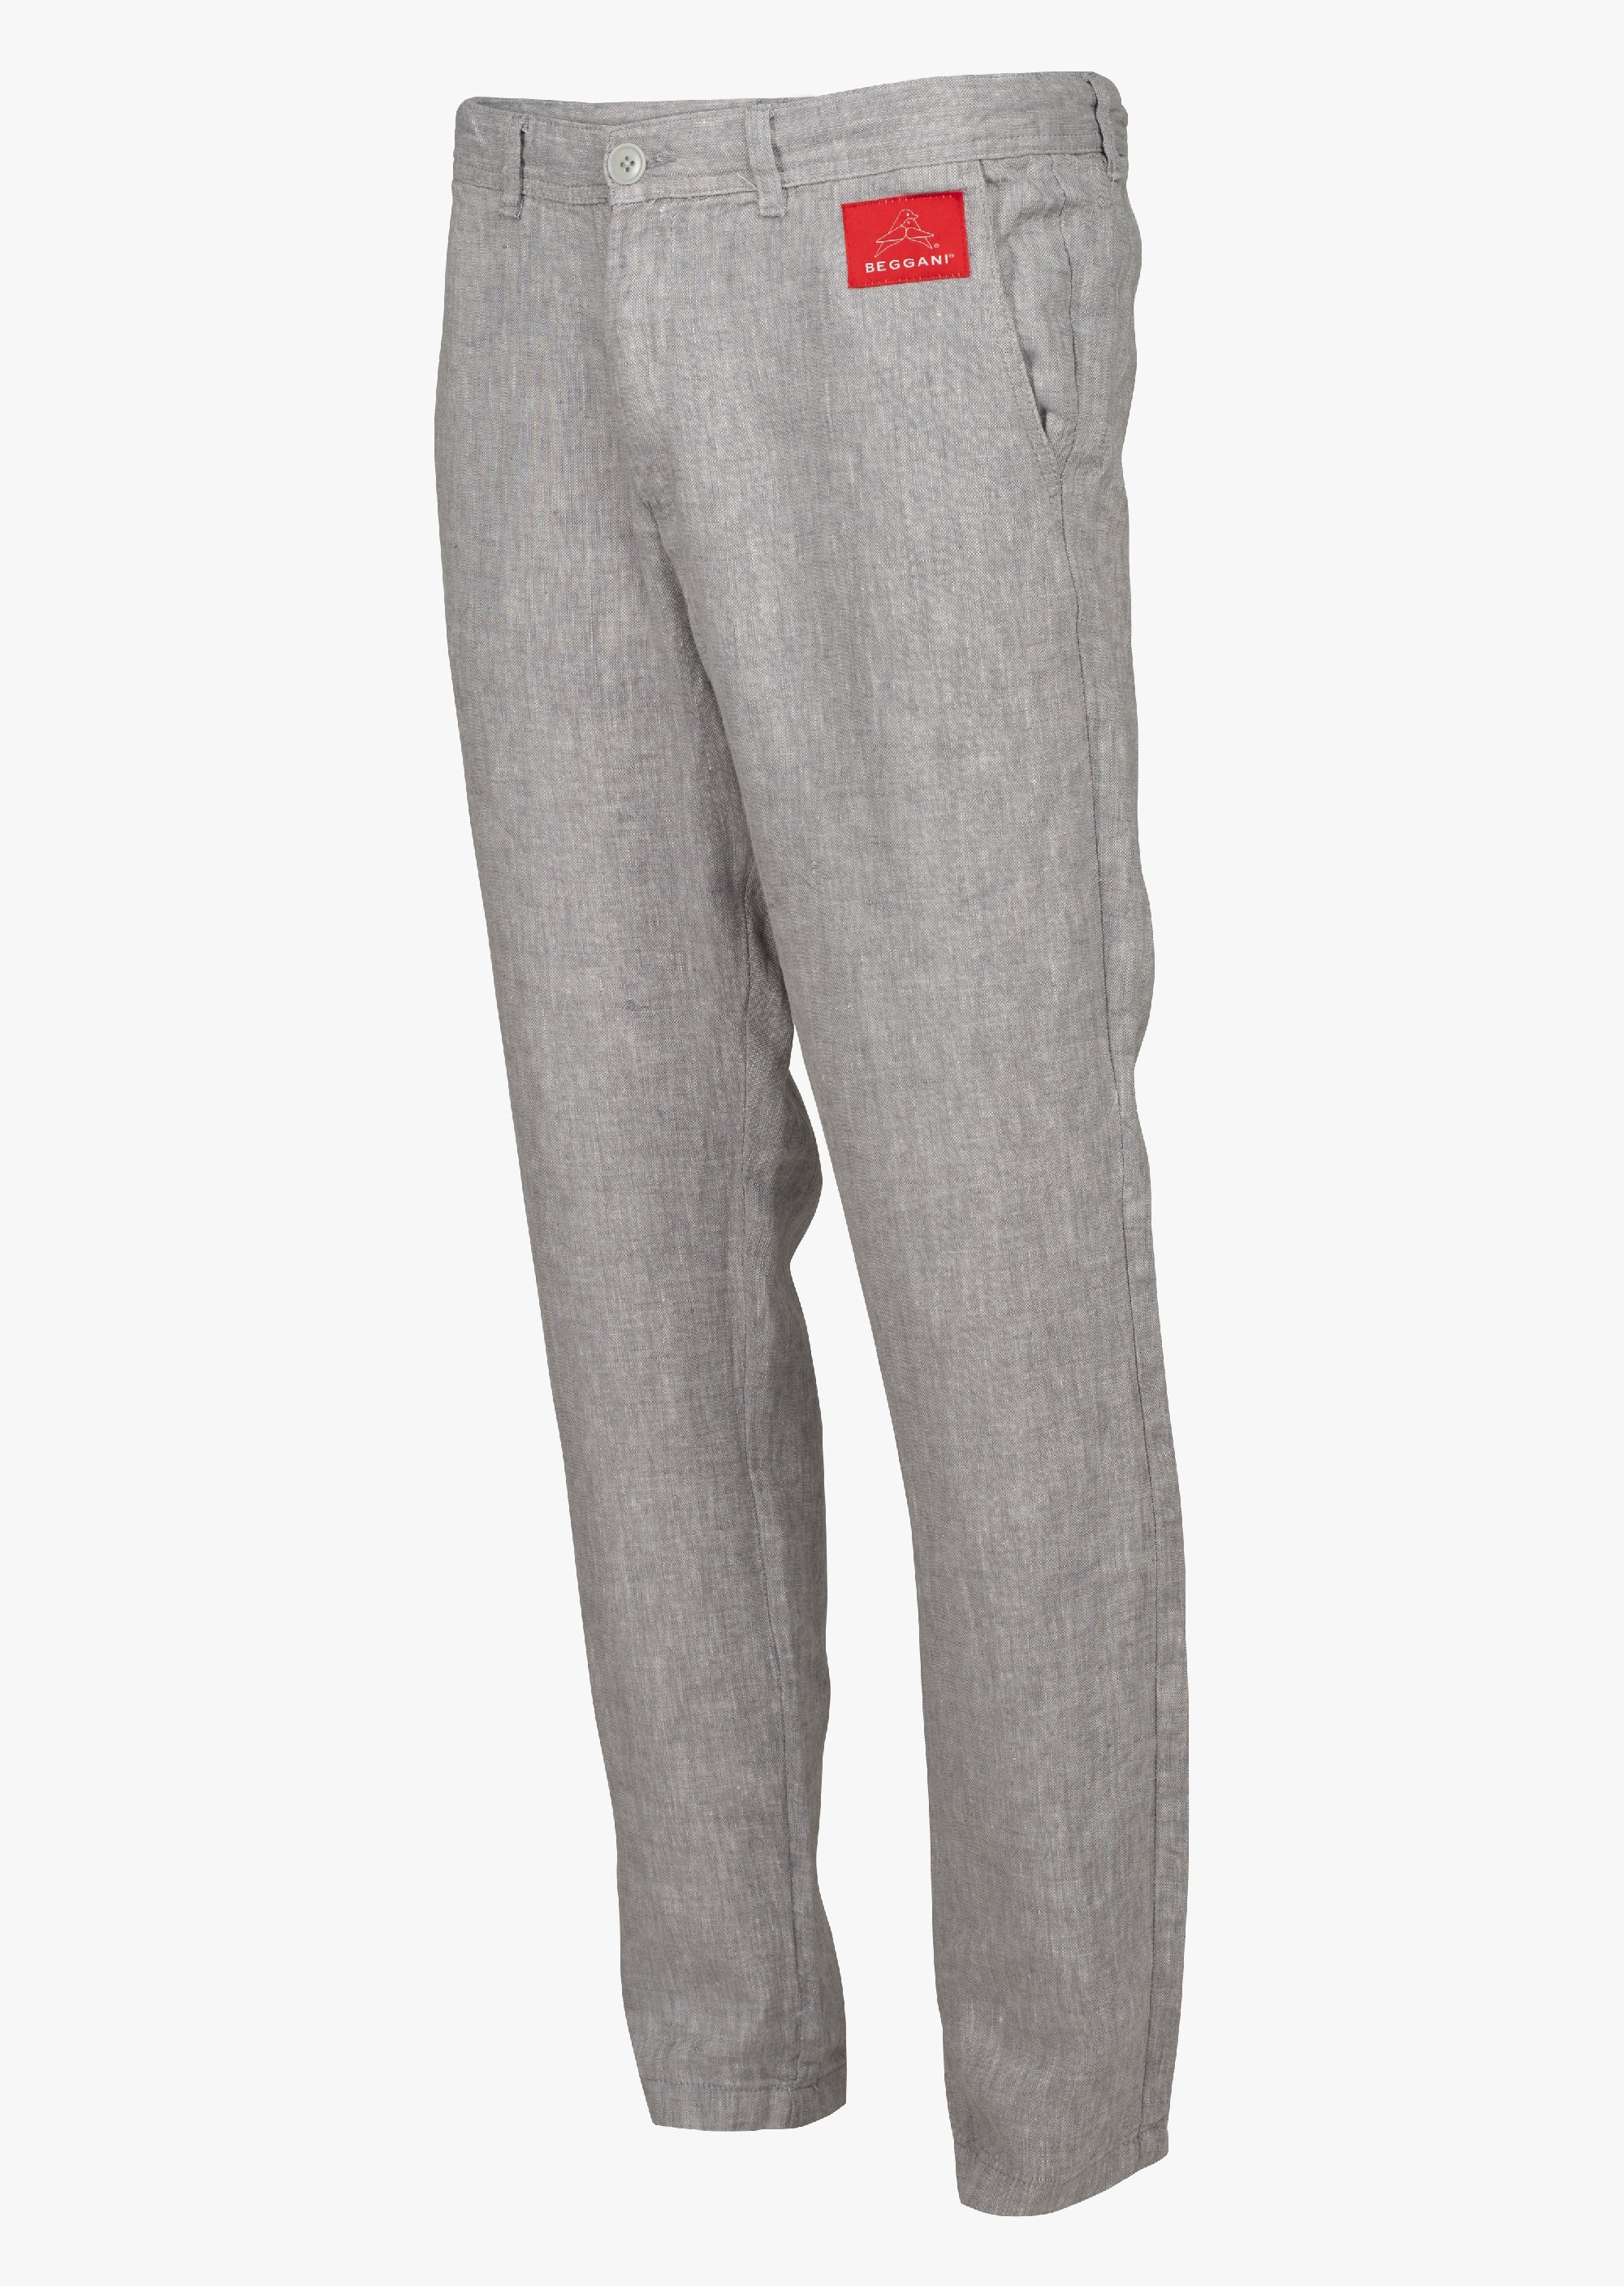 Pants of soft linen with logo BEGGANI